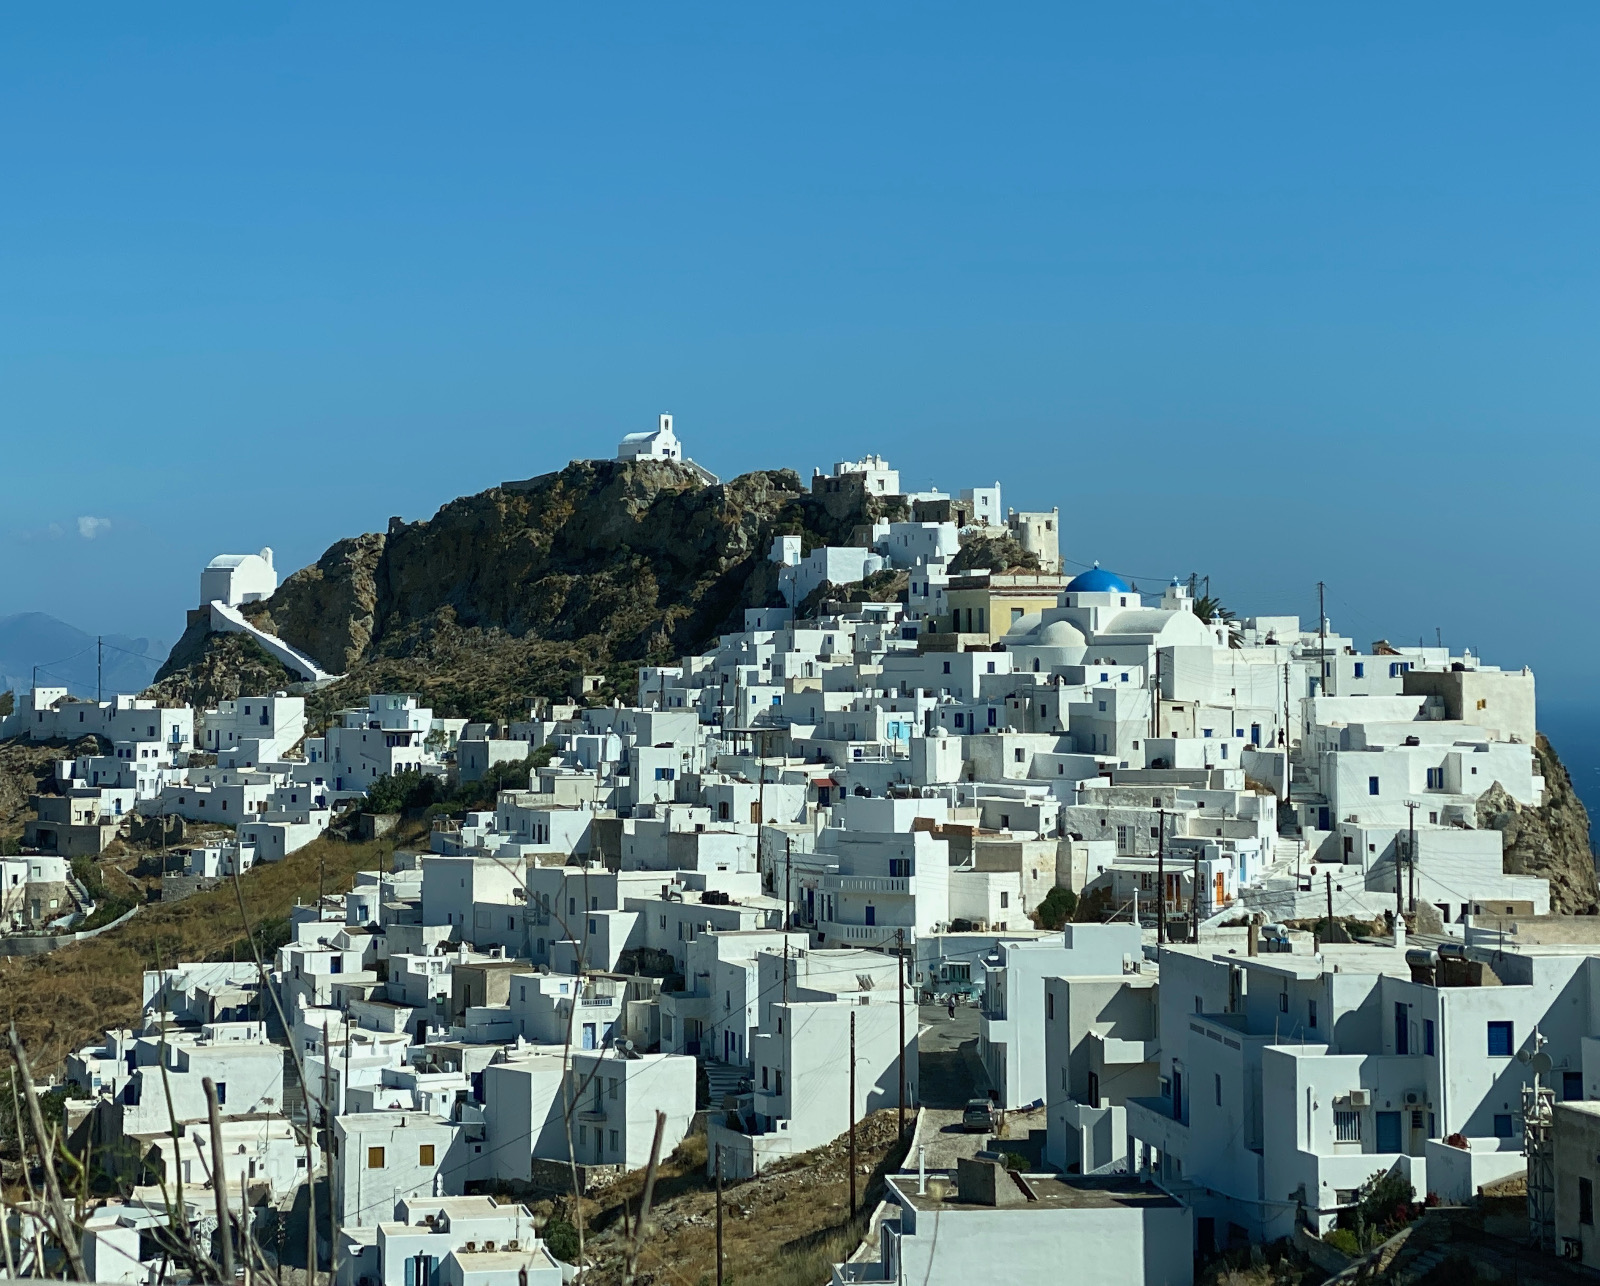 Square white houses clustered on a hill with a chapel at the peak.